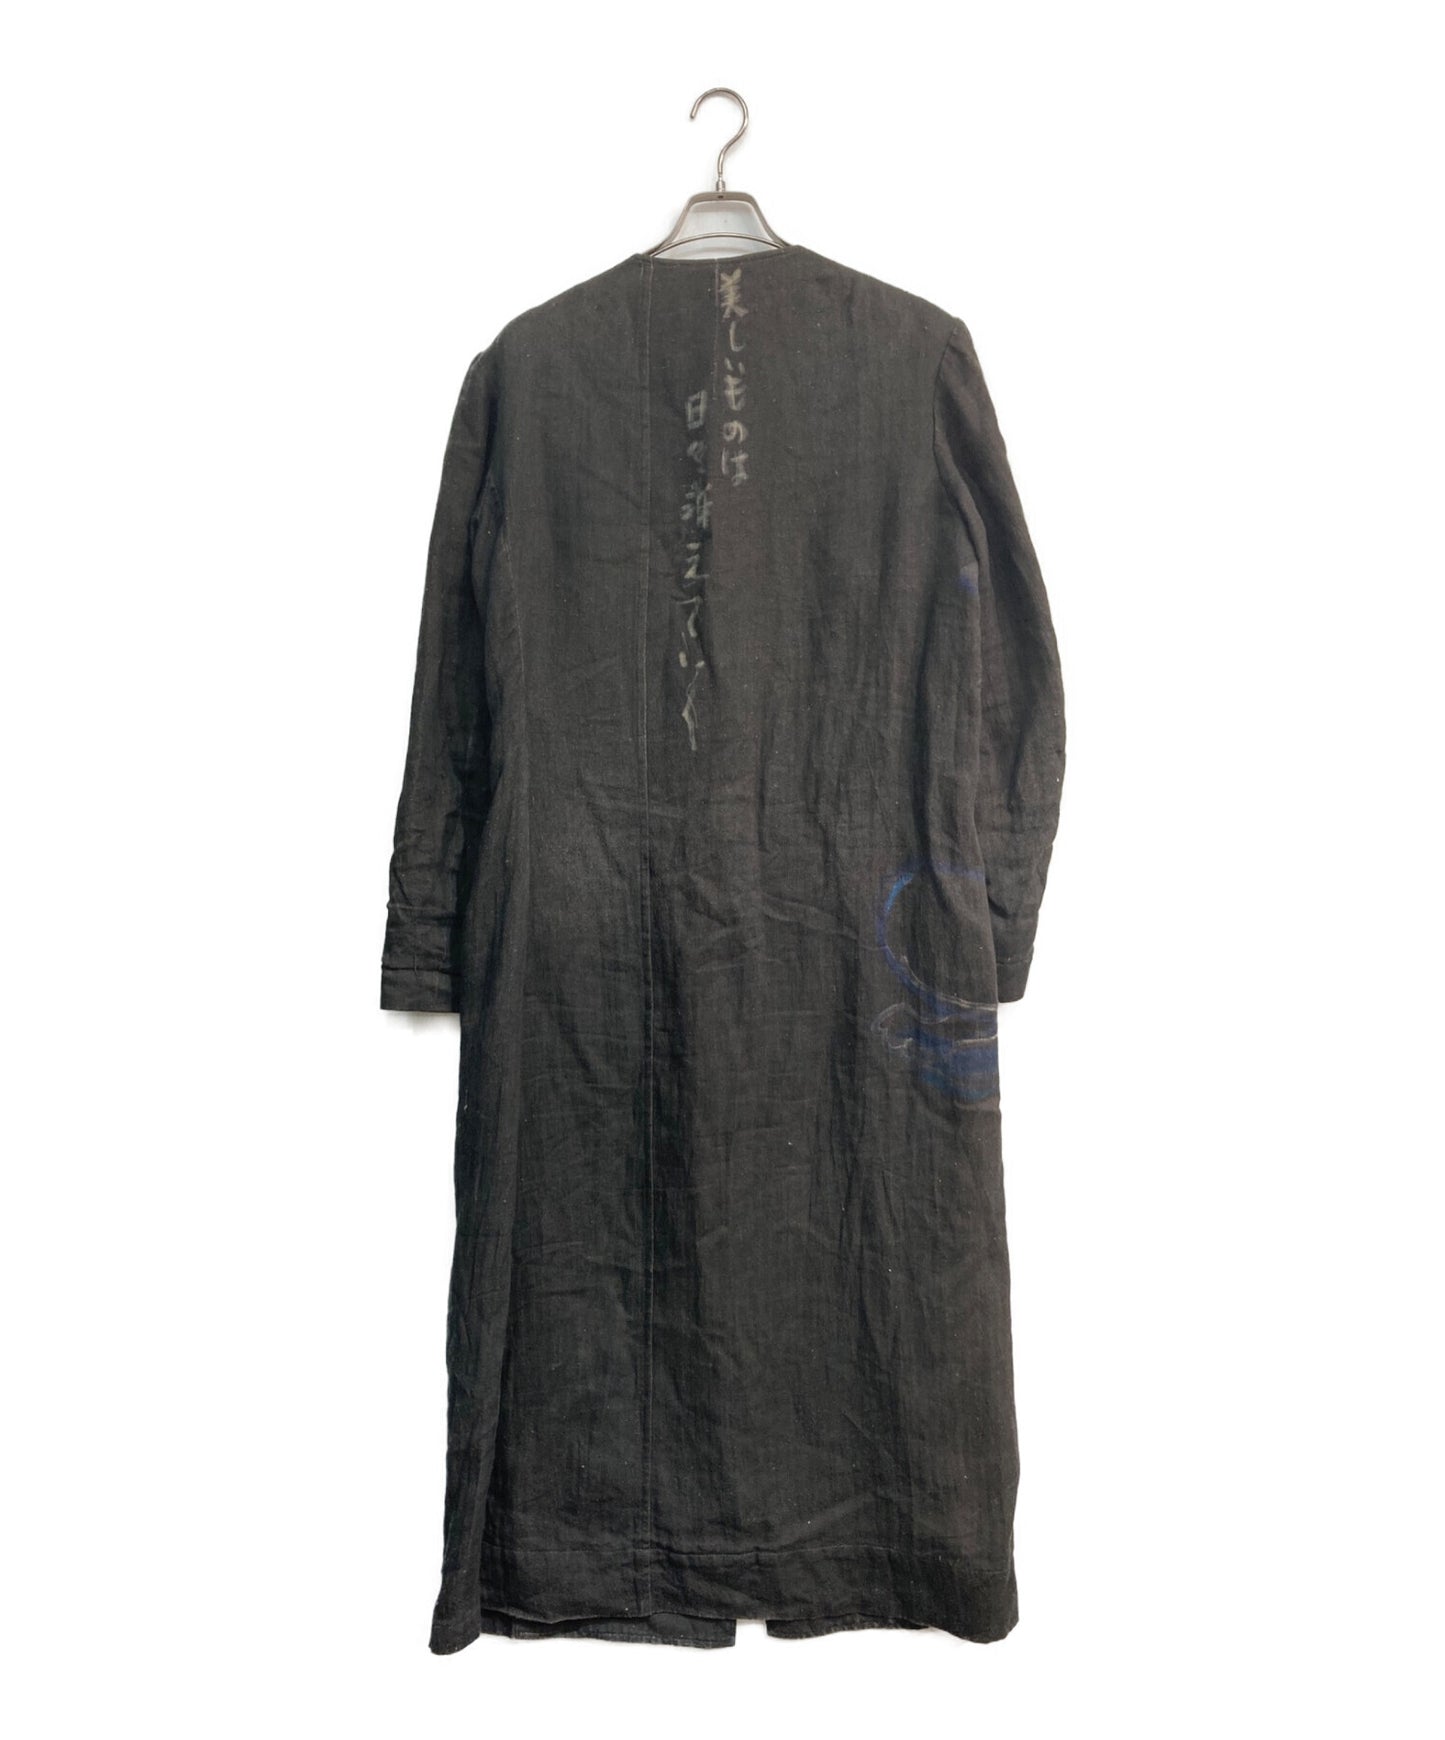 [Pre-owned] Yohji Yamamoto pour homme 20SS LOOK No.1 P double top front long dress HN-D17-816 Beautiful things disappear every day HN-D17-816